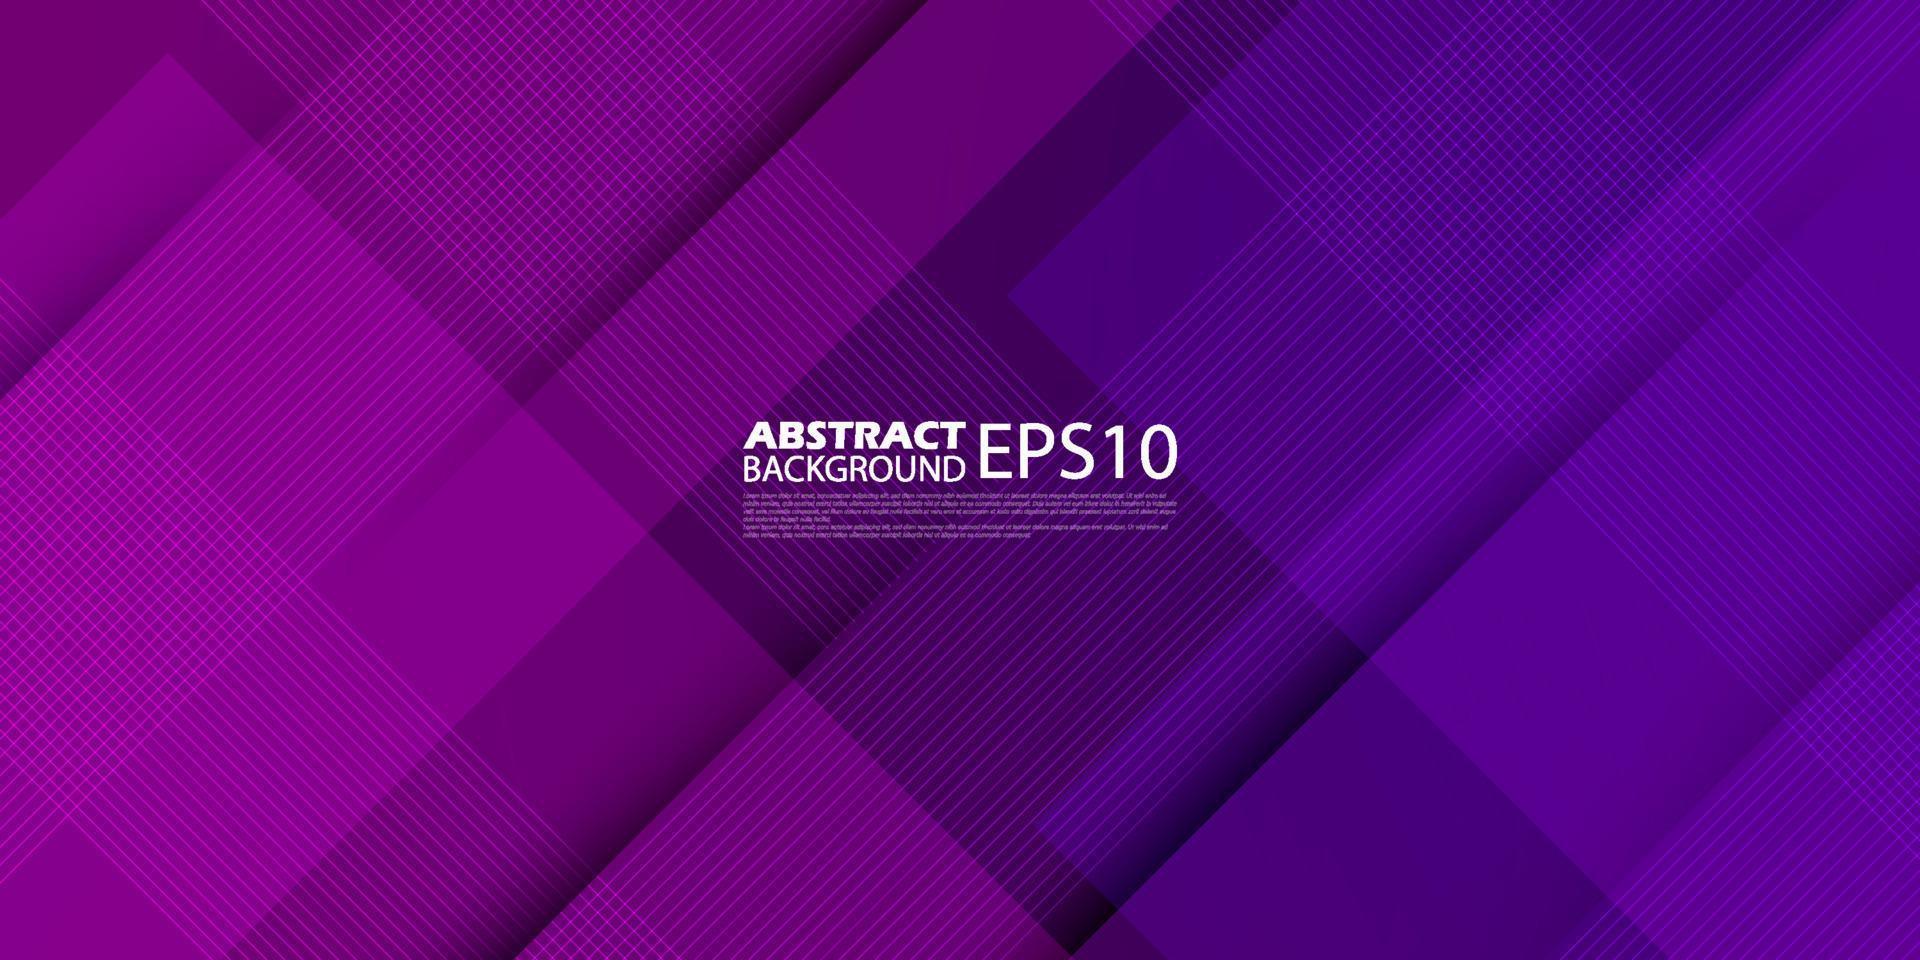 Mosaic geometric dark purple and pink gradient background with shadow lines. Dynamic shapes composition.cool design cover product.Eps10 vector